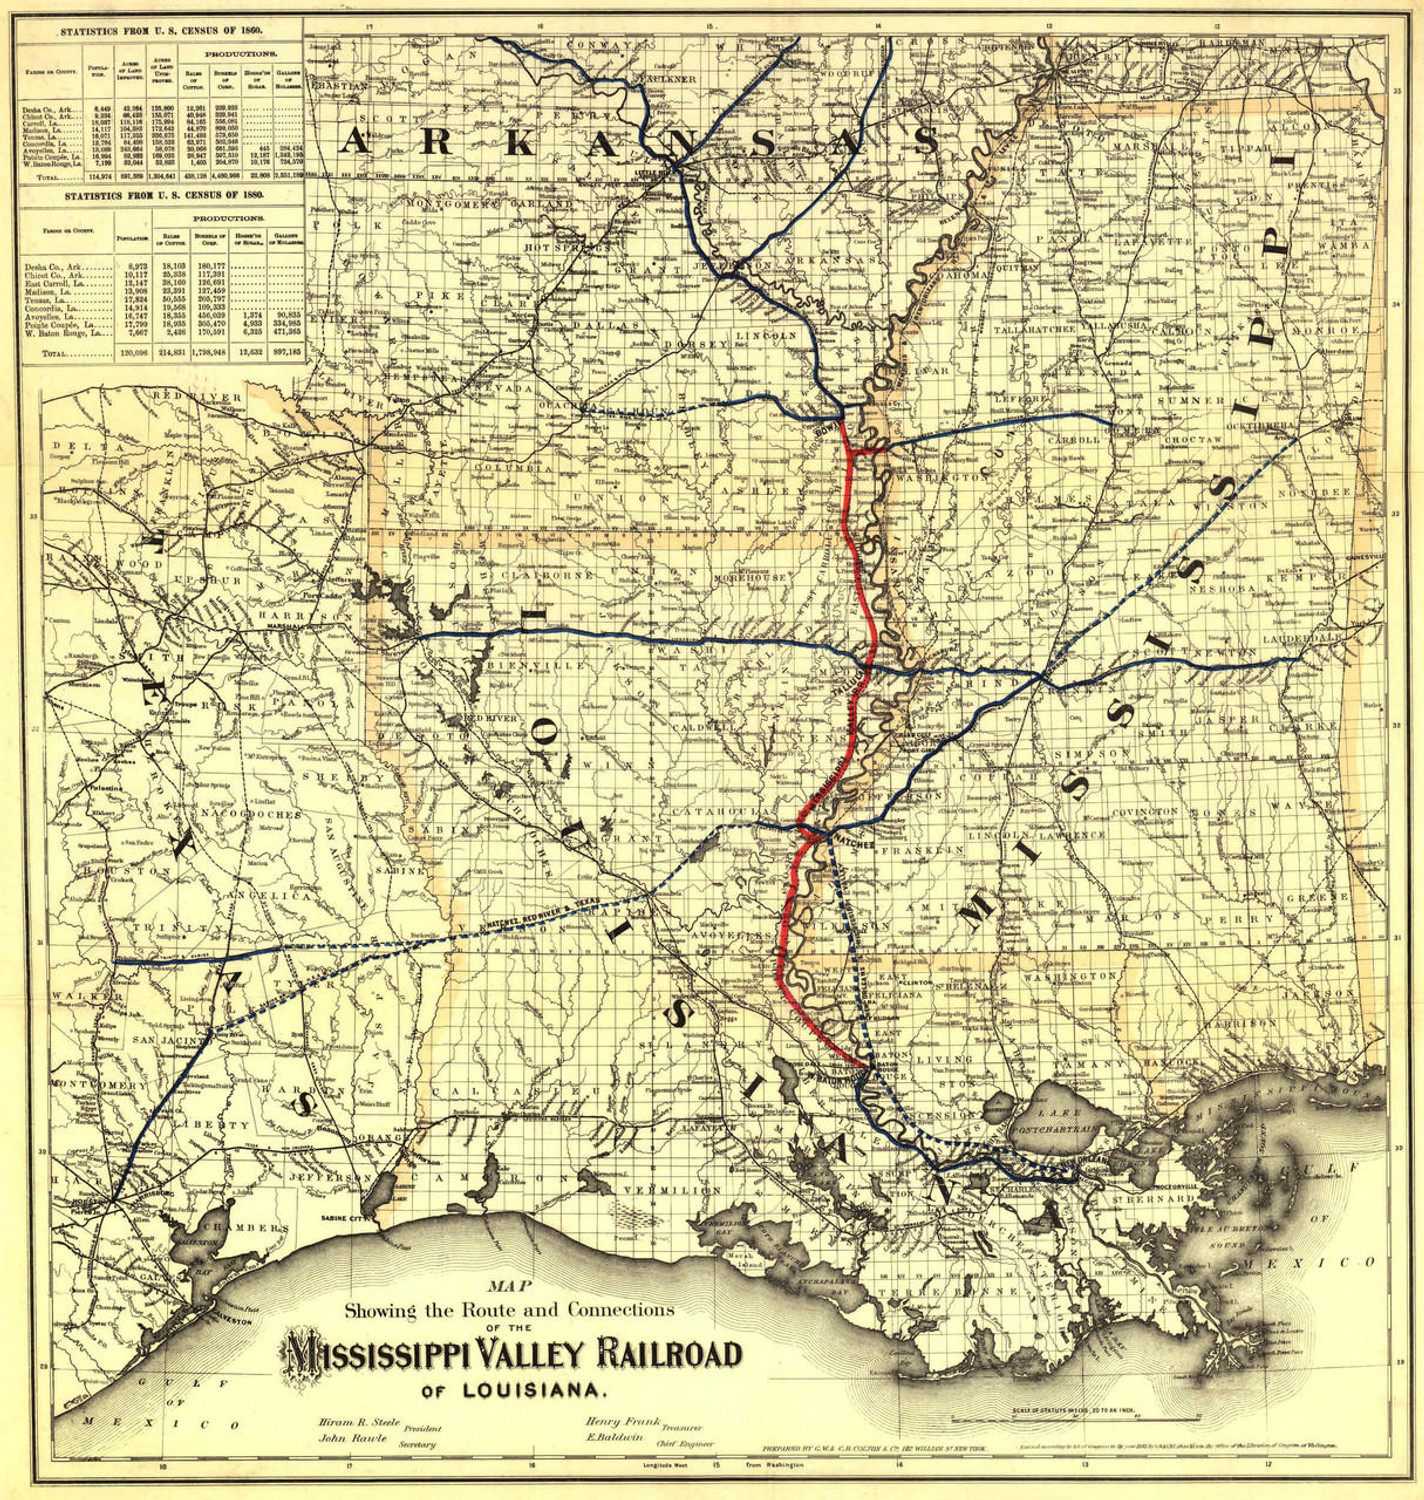 Historic Railroad Map of the Mississippi Valley Railroad - 1882, image 1, World Maps Online